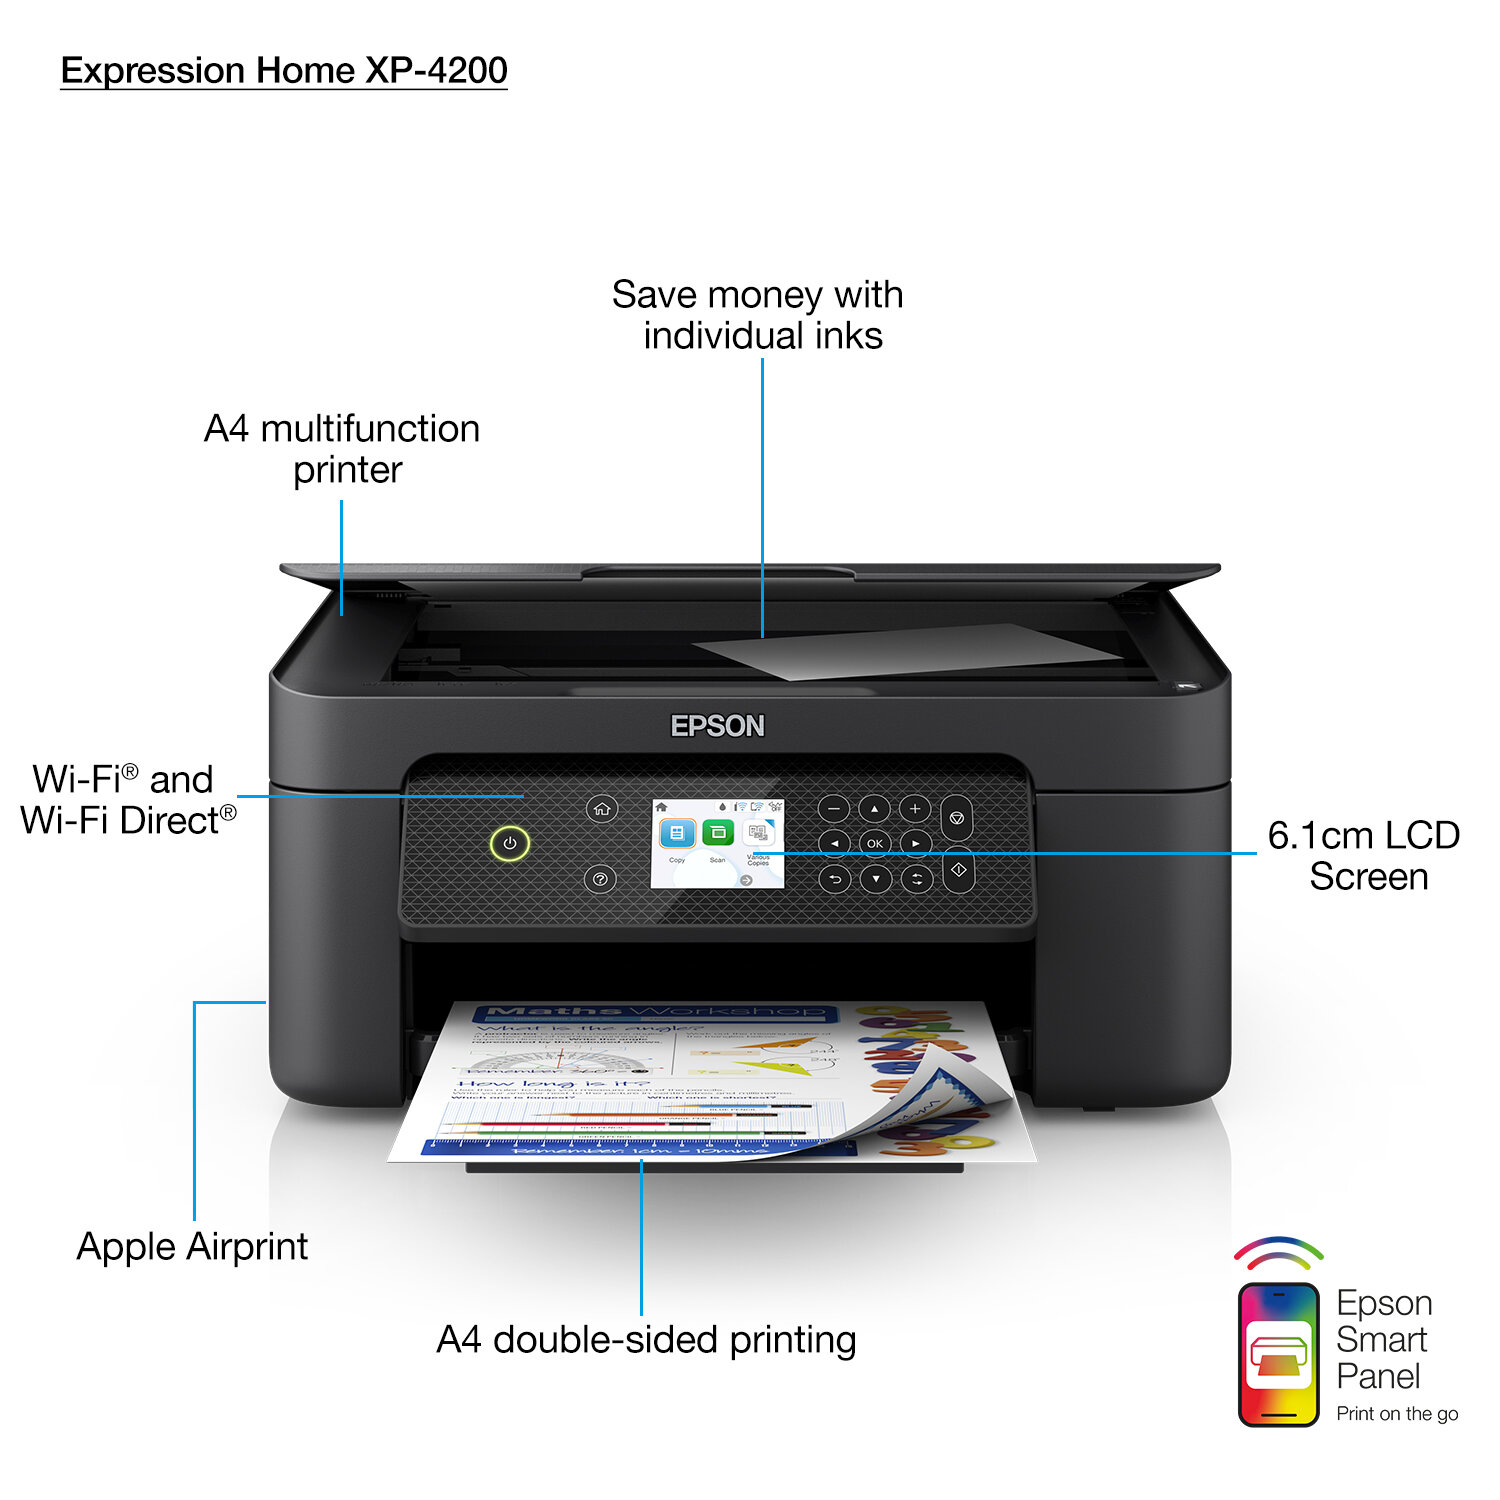 Epson Expression Home XP-4100 specifications